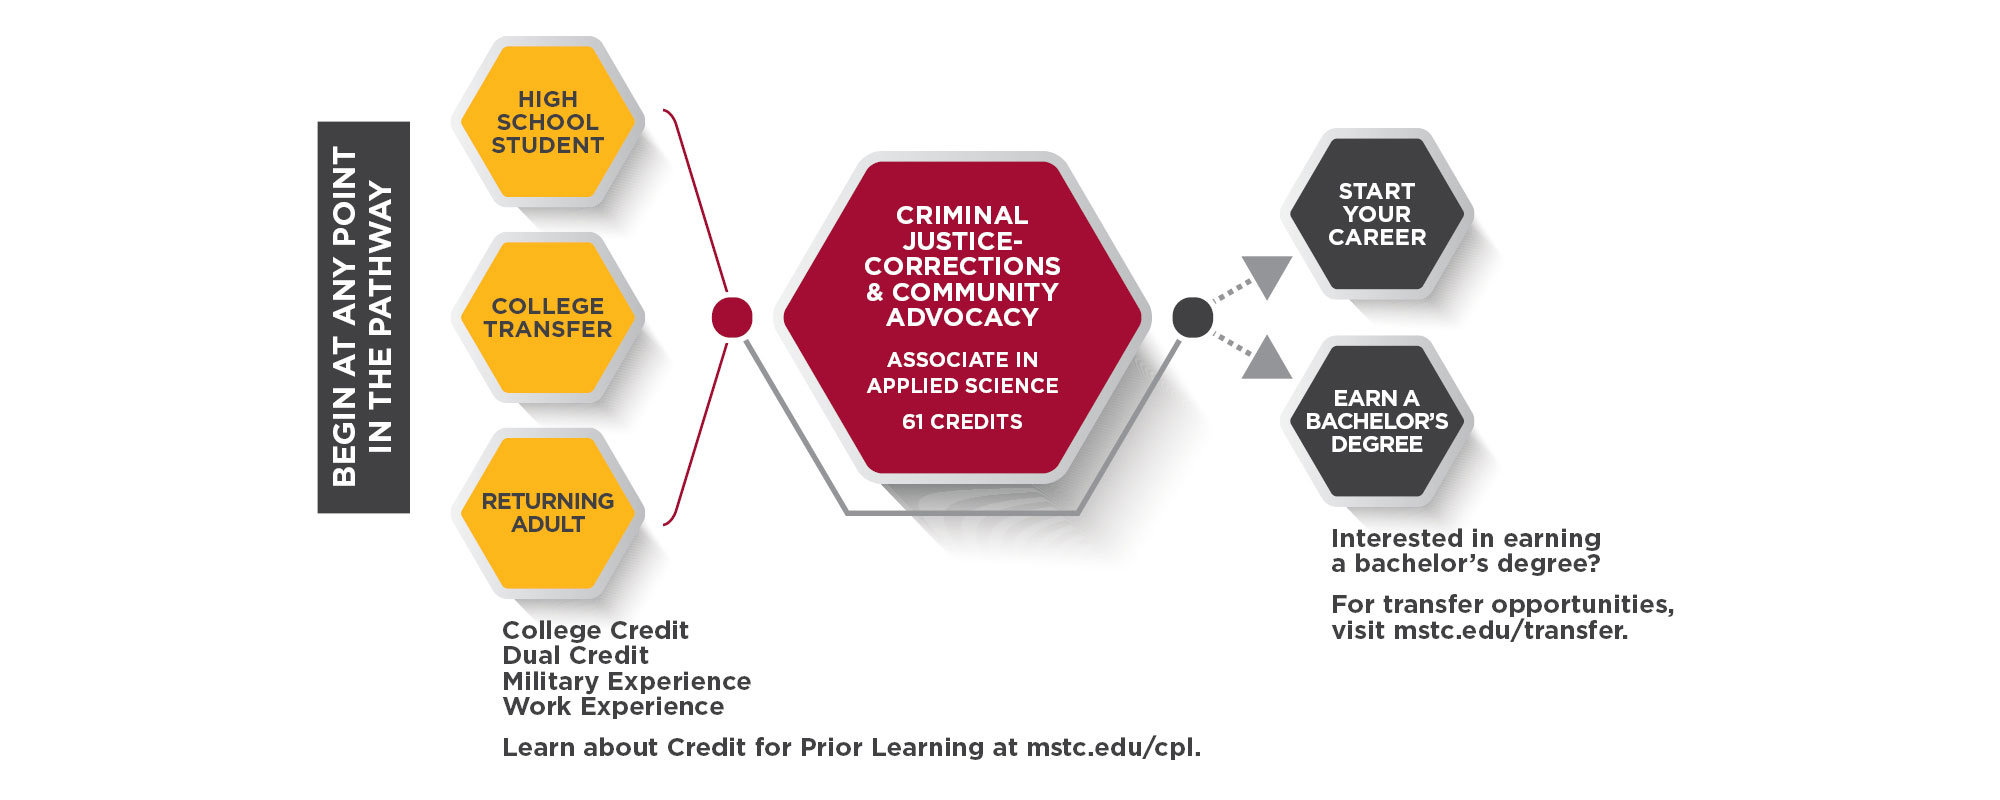 Criminal Justice-Corrections & Community Advocacy Pathway Graphic